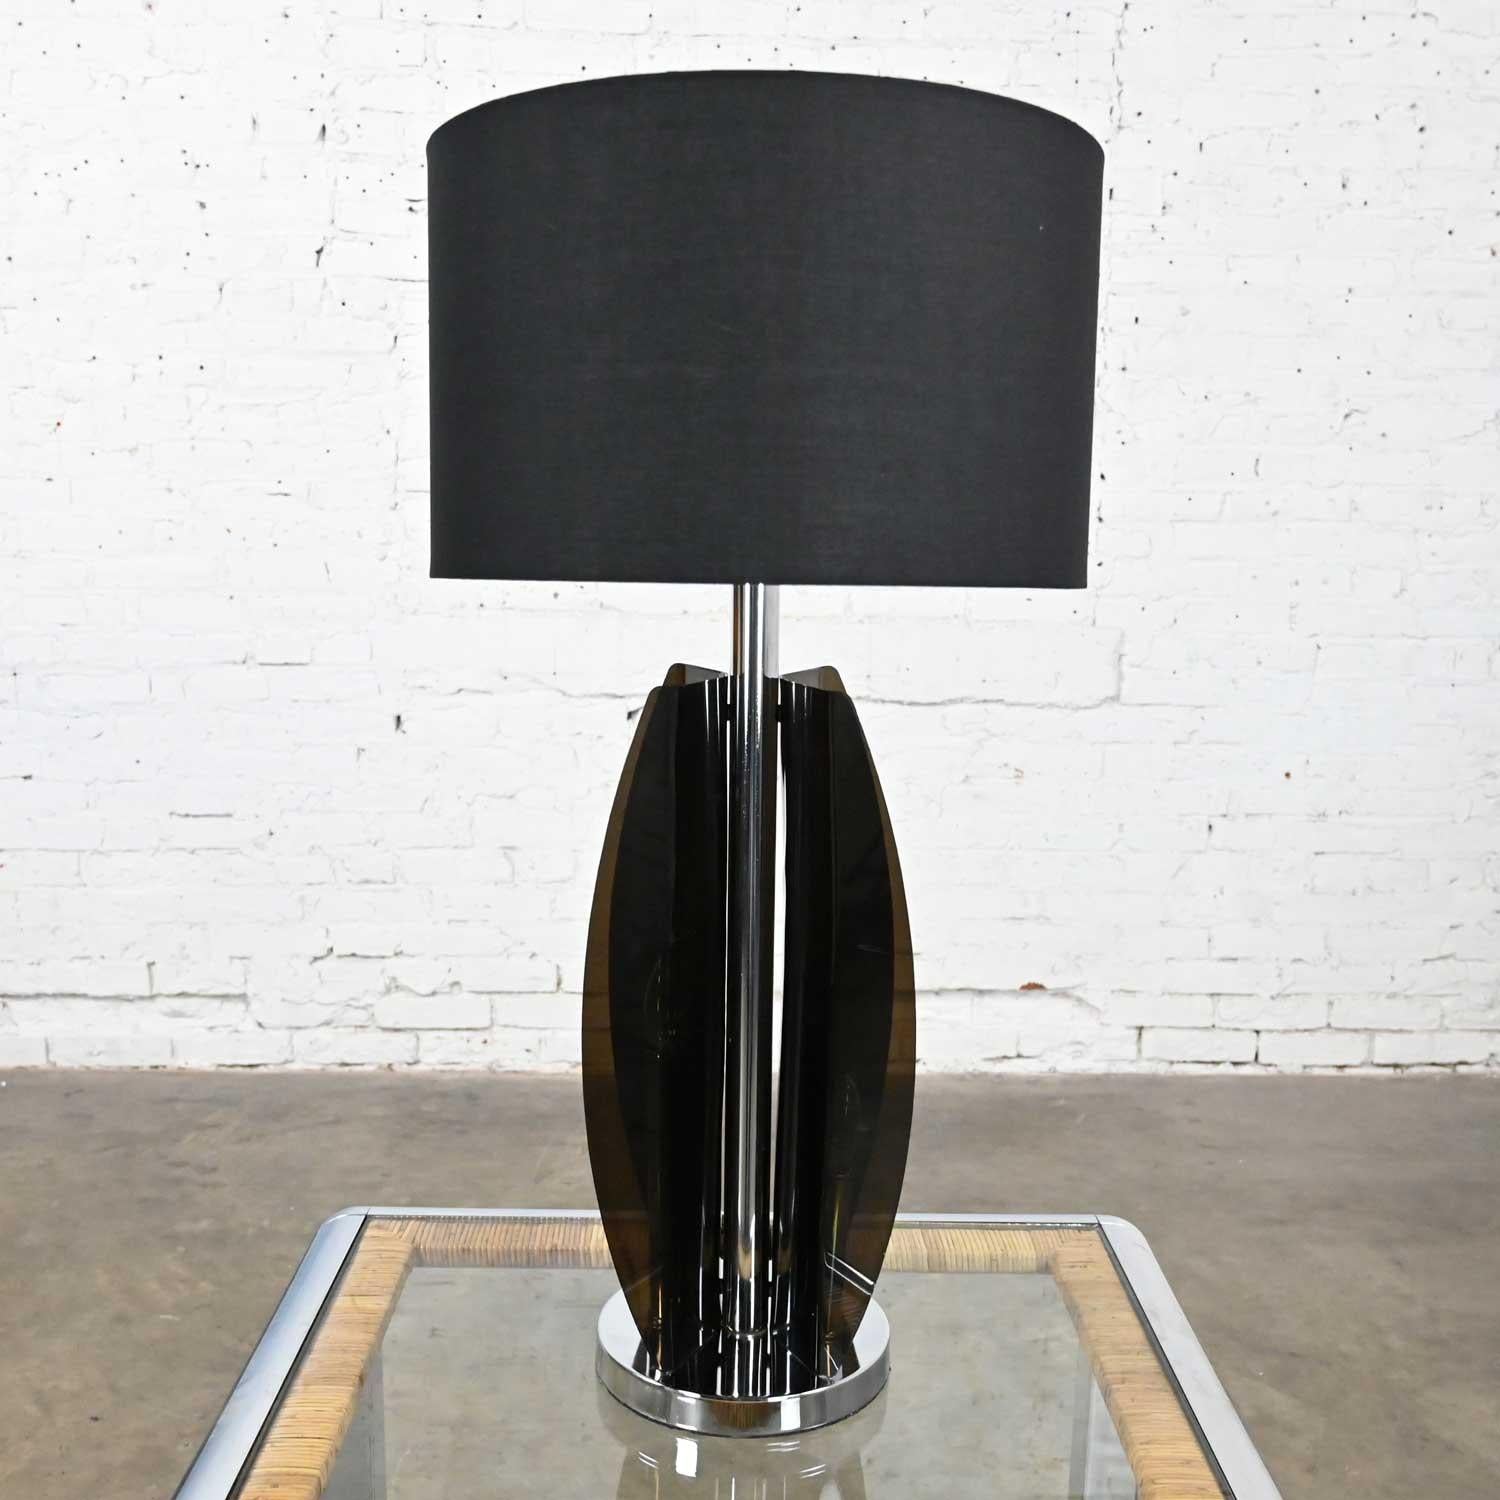 20th Century Mid-Century Modern Smoke Gray/Grey Lucite Chrome Table Lamp New Black Drum Shade For Sale